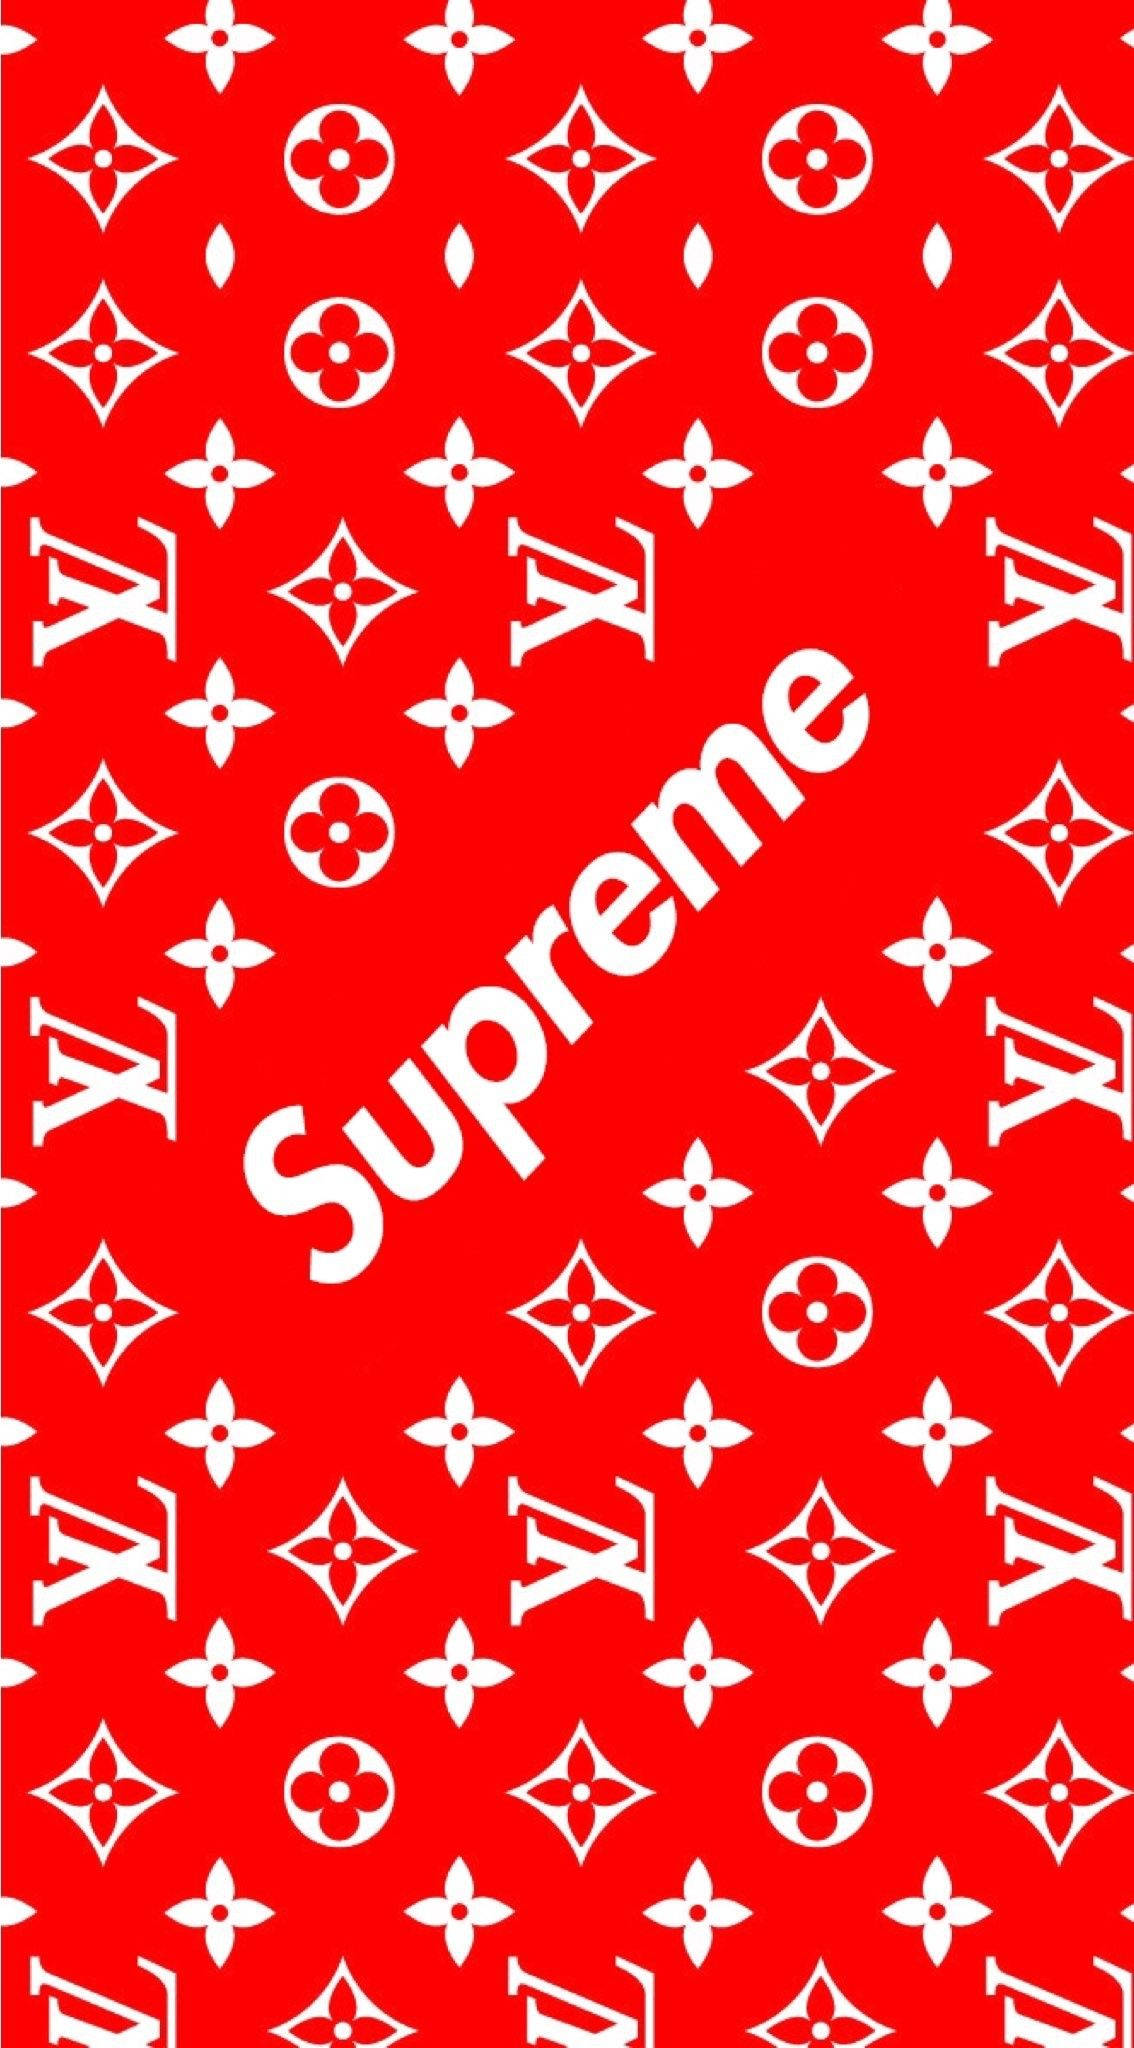 Hypebeast Collage Wallpapers